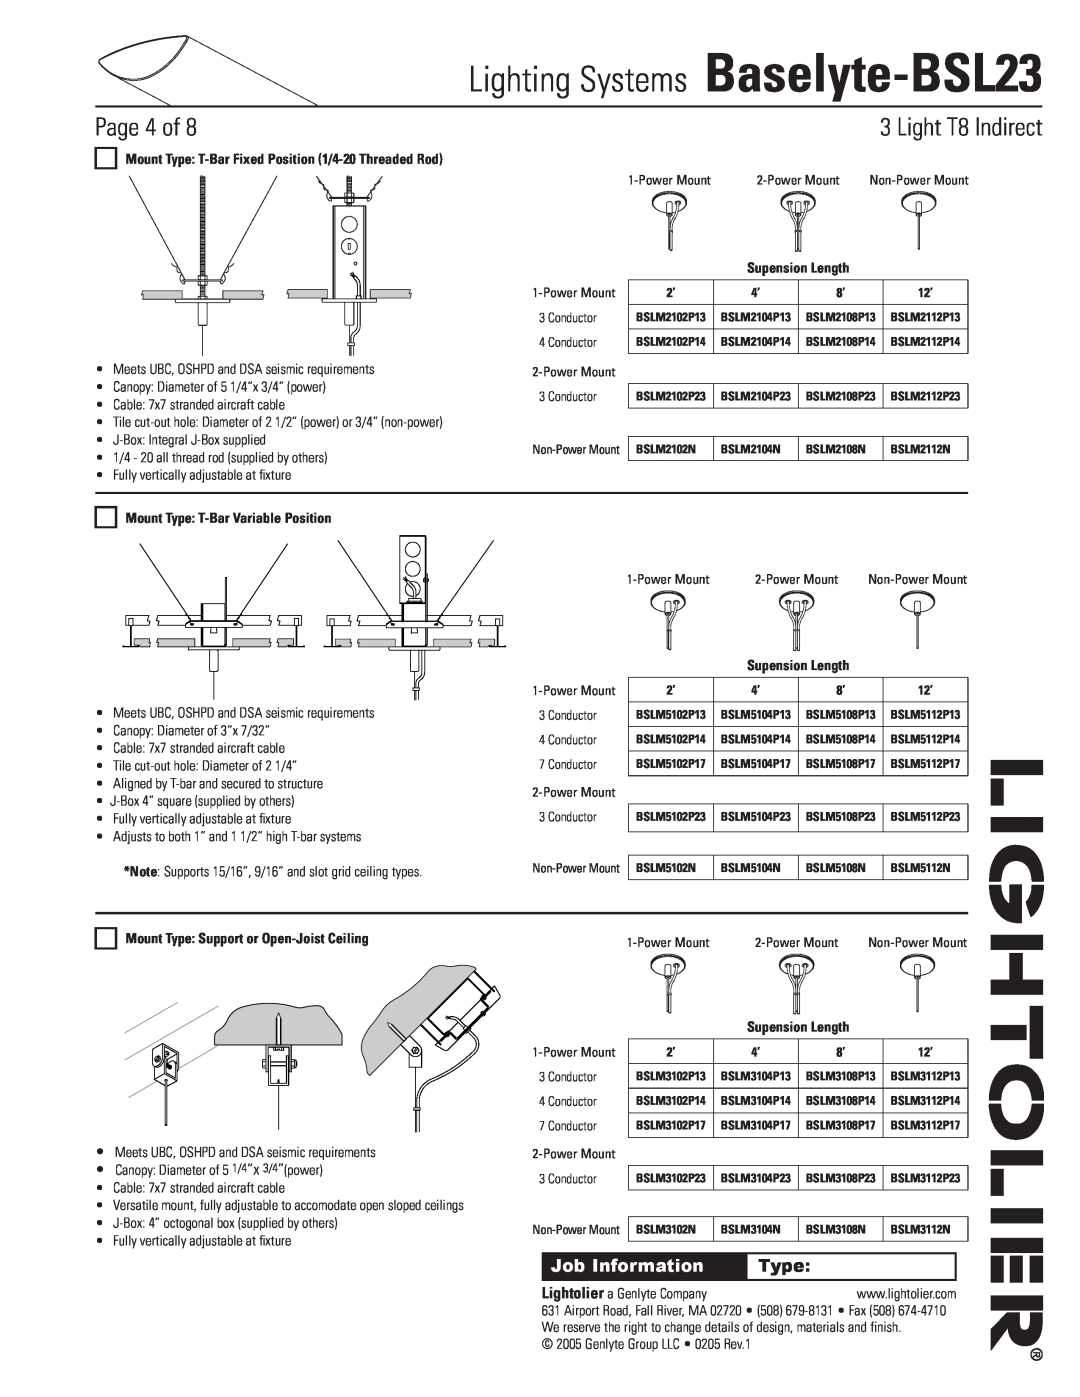 Lightolier Baselyte-BSL23 Page of, Mount Type T-BarVariable Position, Mount Type Support or Open-JoistCeiling 